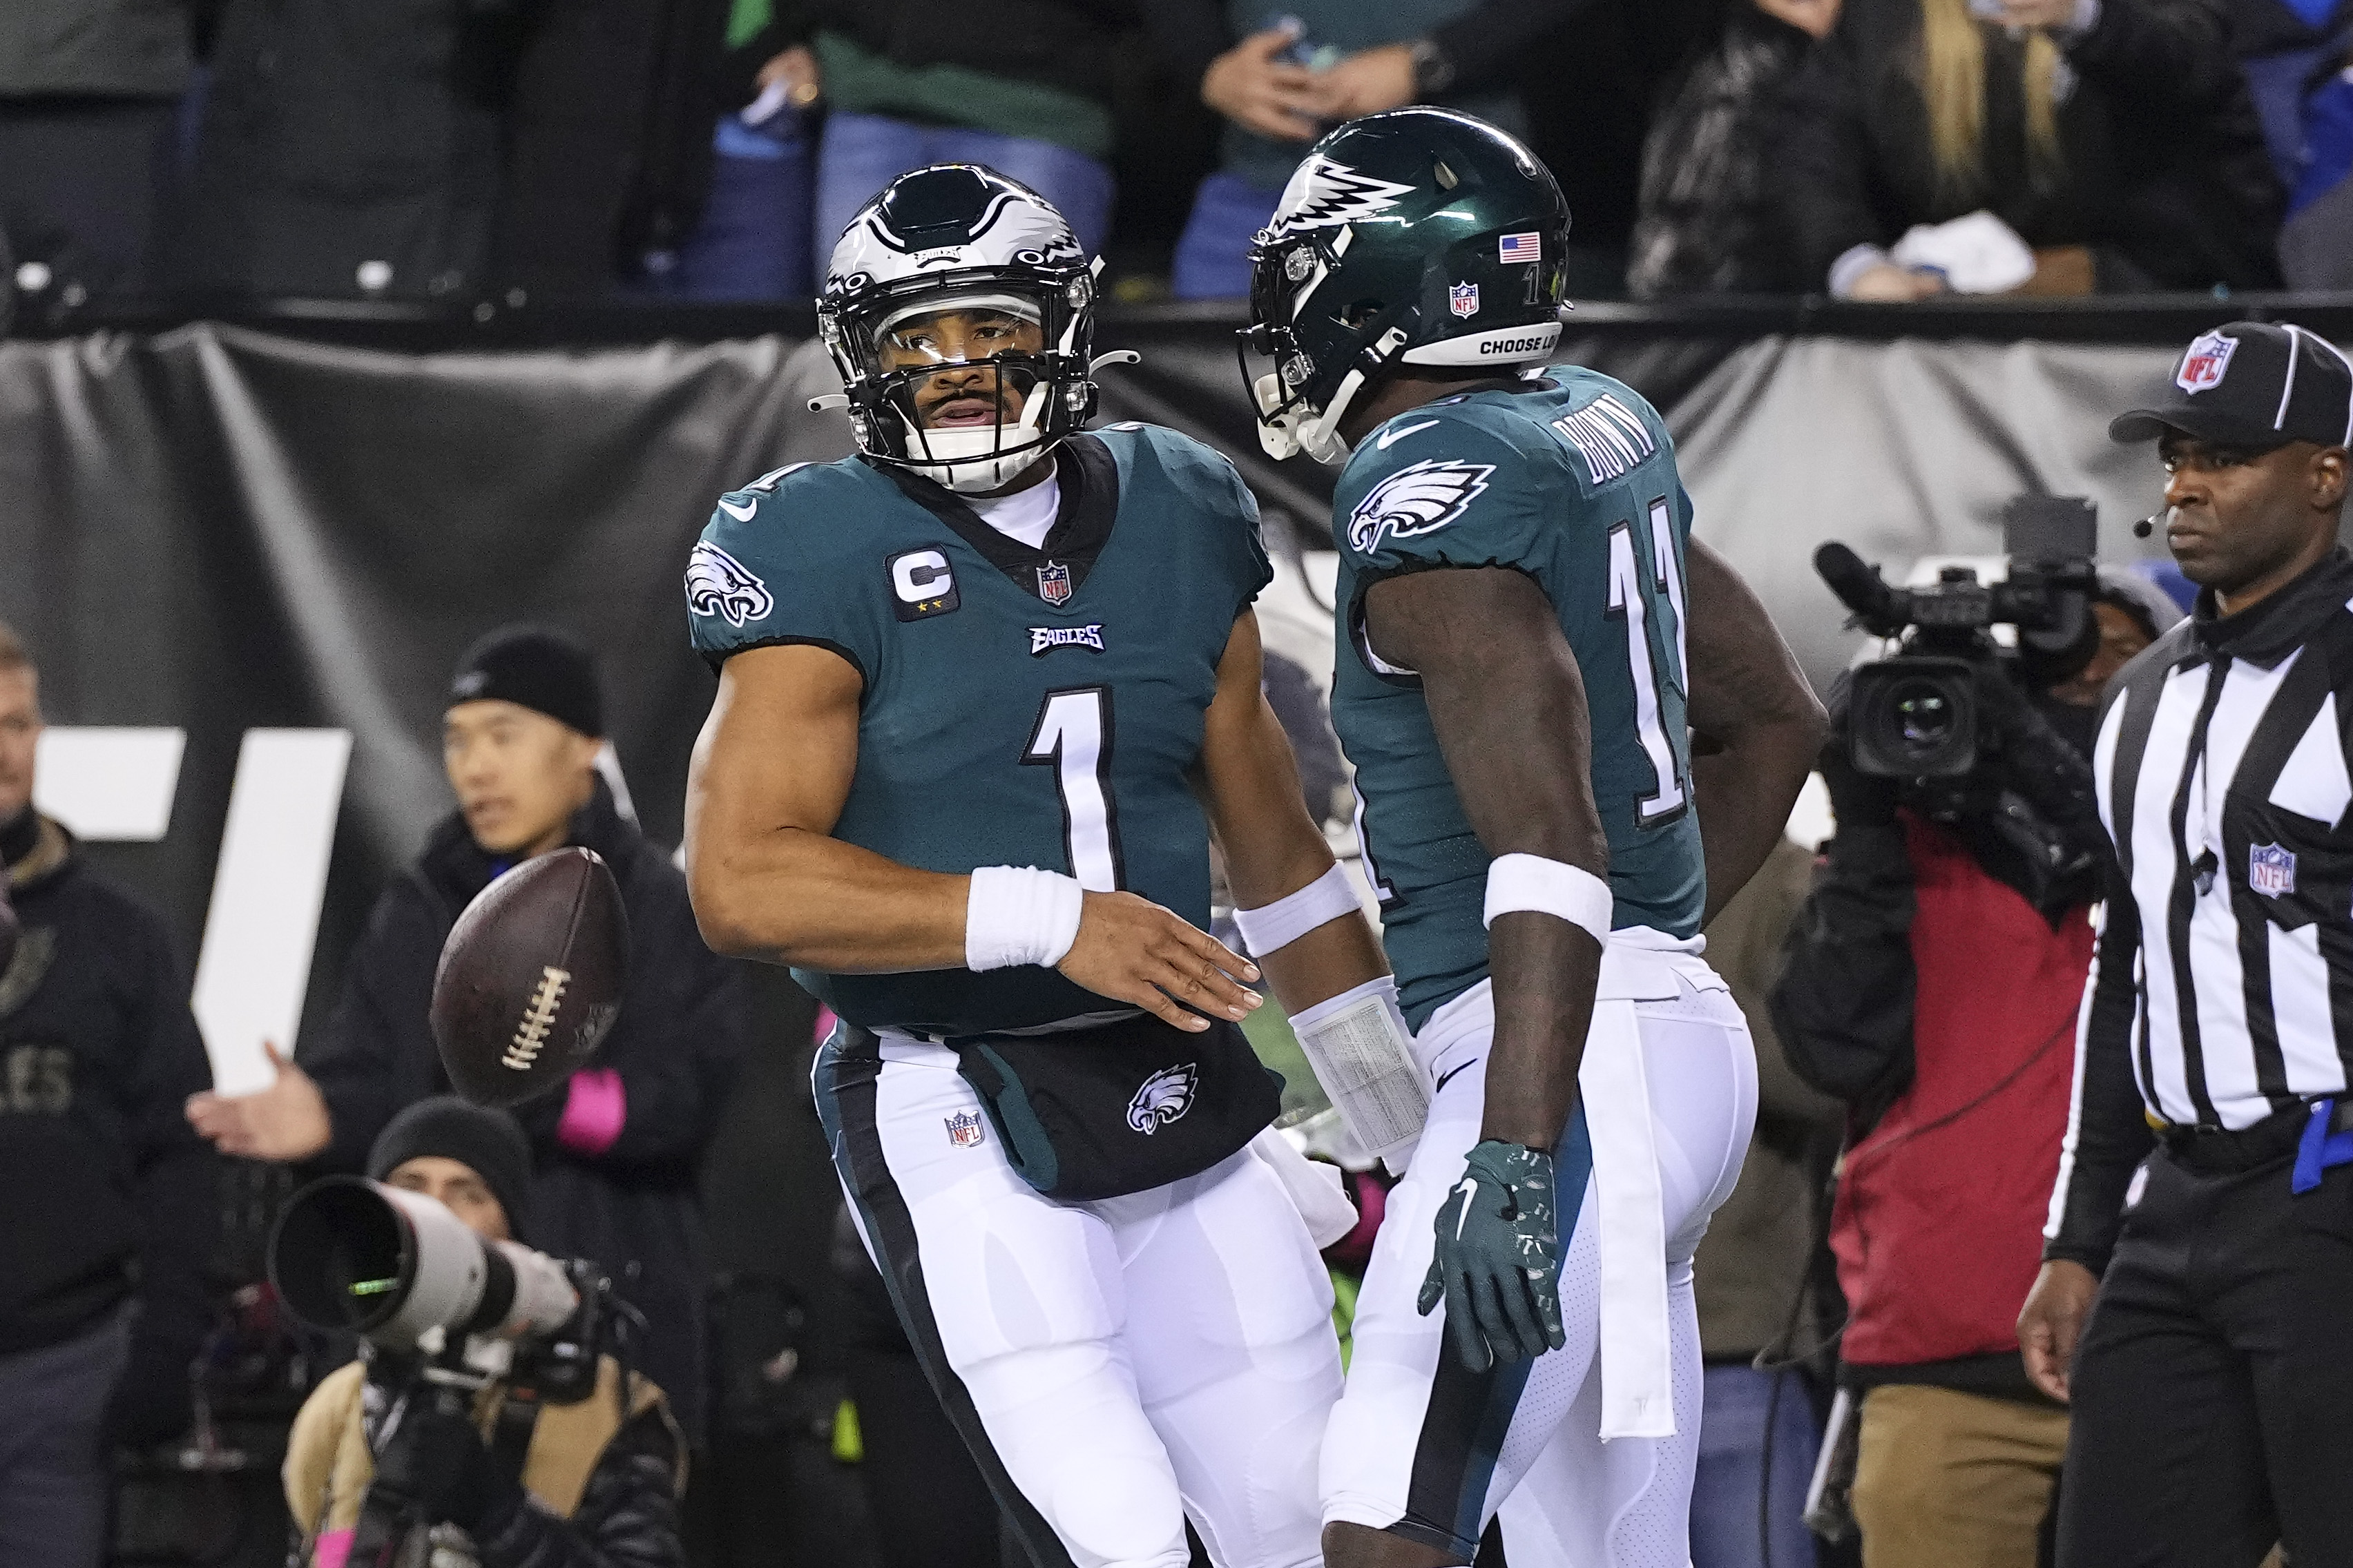 Jalen Hurts #1 and A.J. Brown #11 of the Philadelphia Eagles react against the New York Giants during the NFC Divisional Playoff game at Lincoln Financial Field on January 21, 2023 in Philadelphia, Pennsylvania.